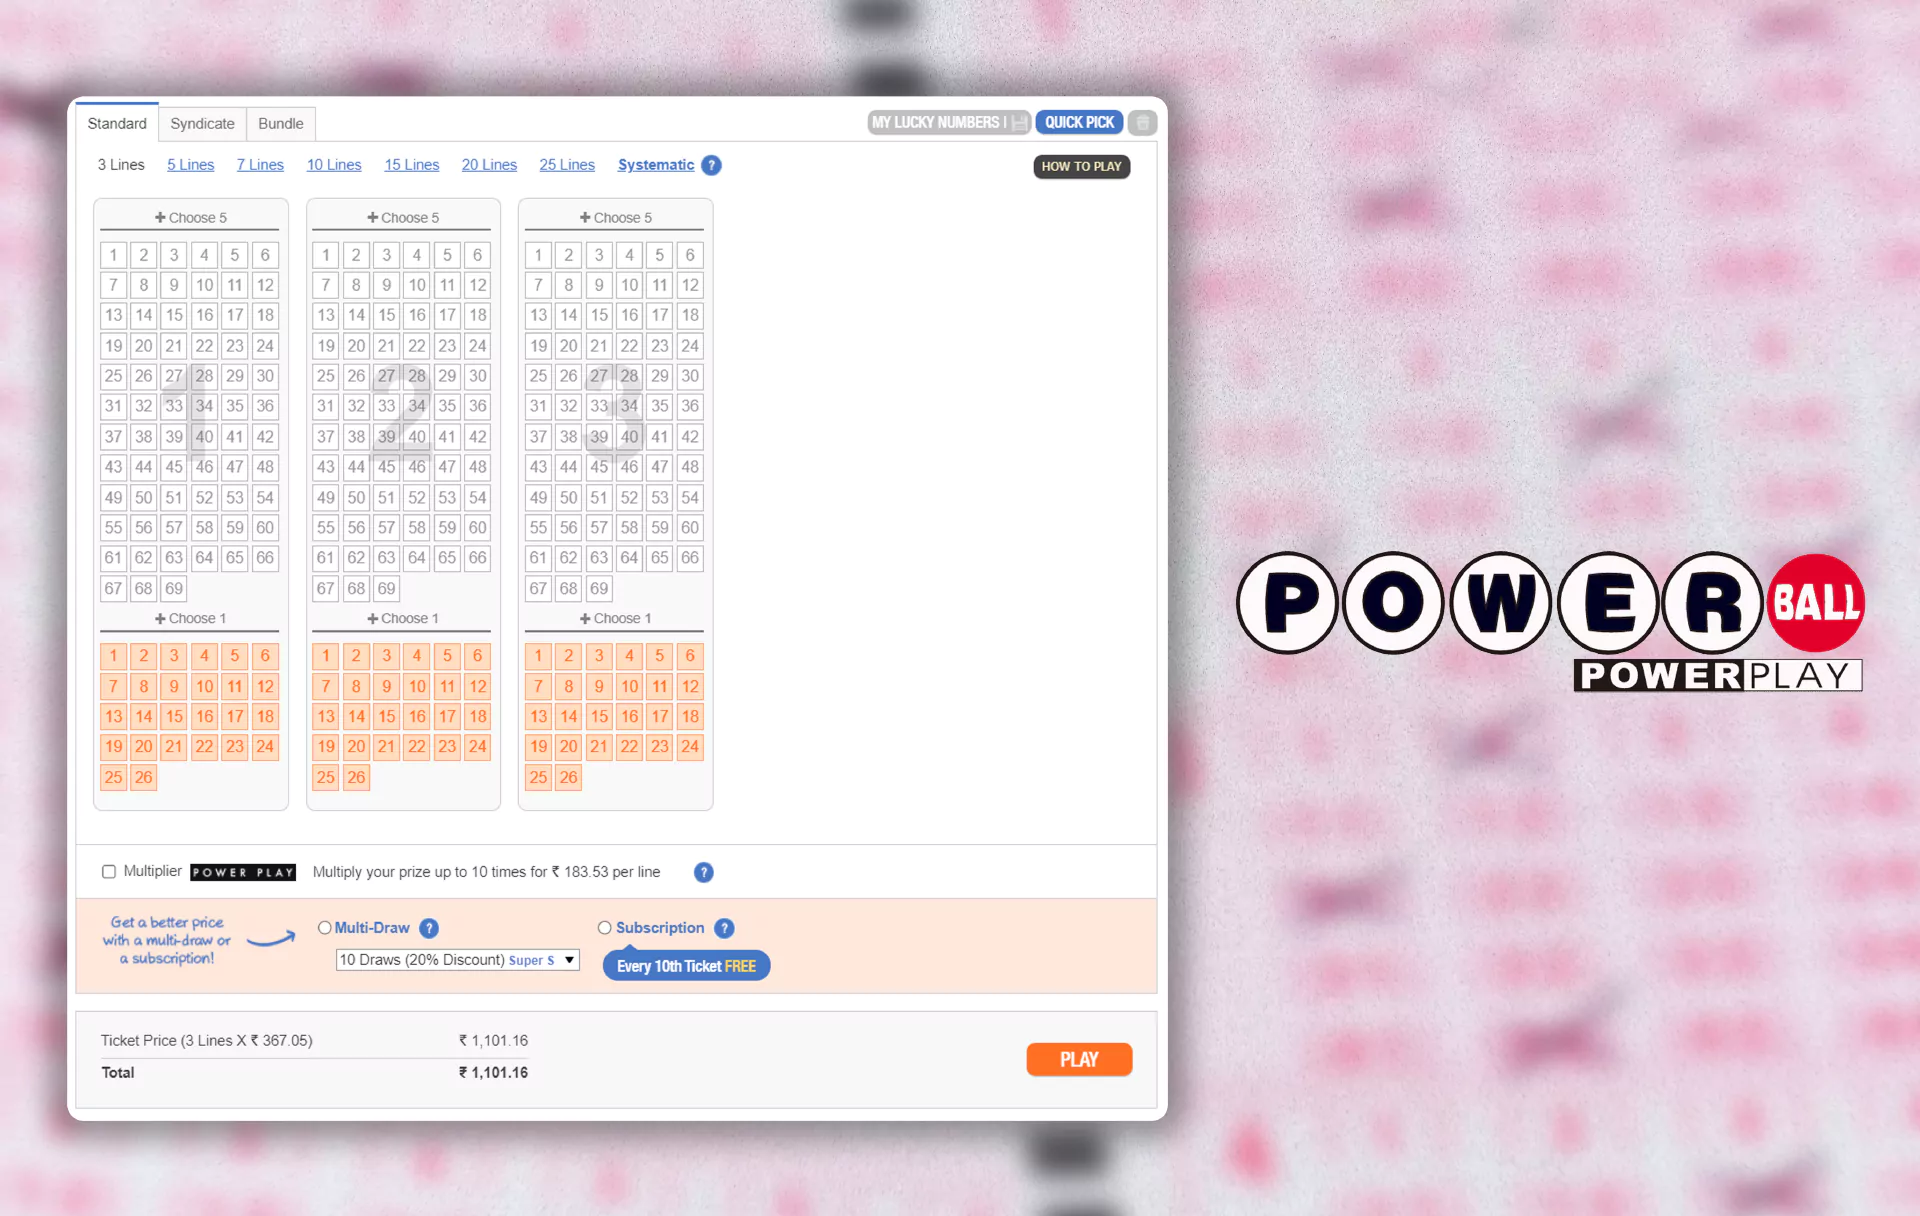 Powerball is another well-known lottery based in America.